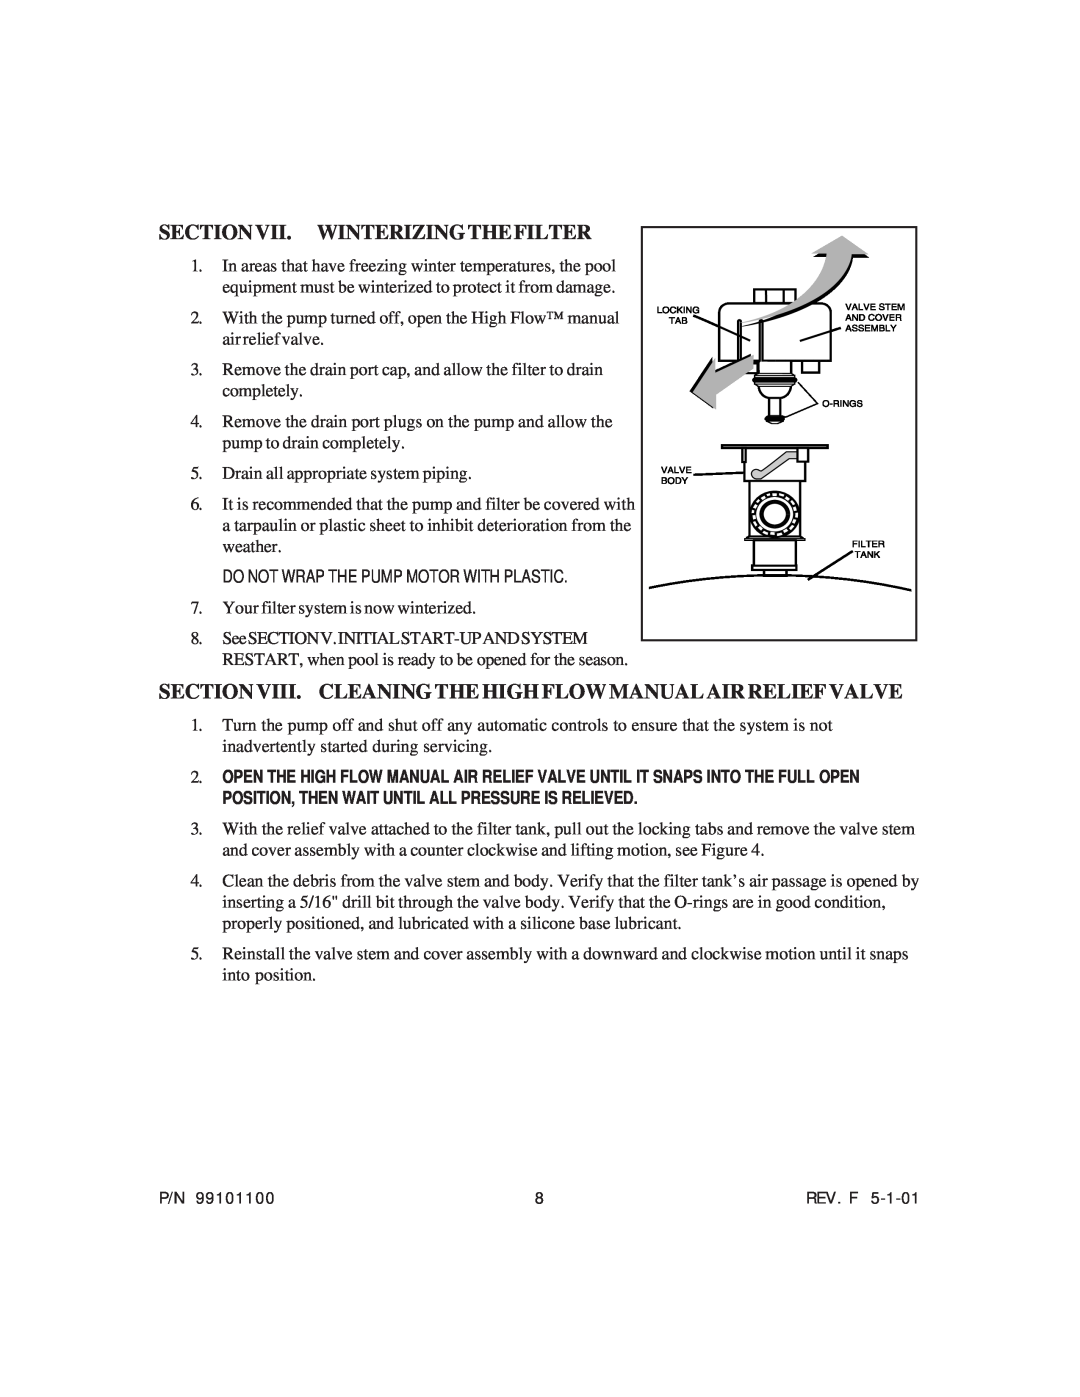 System Works 99101100 Section Vii. Winterizingthefilter, Section Viii. Cleaning The High Flow Manual Air Relief Valve 